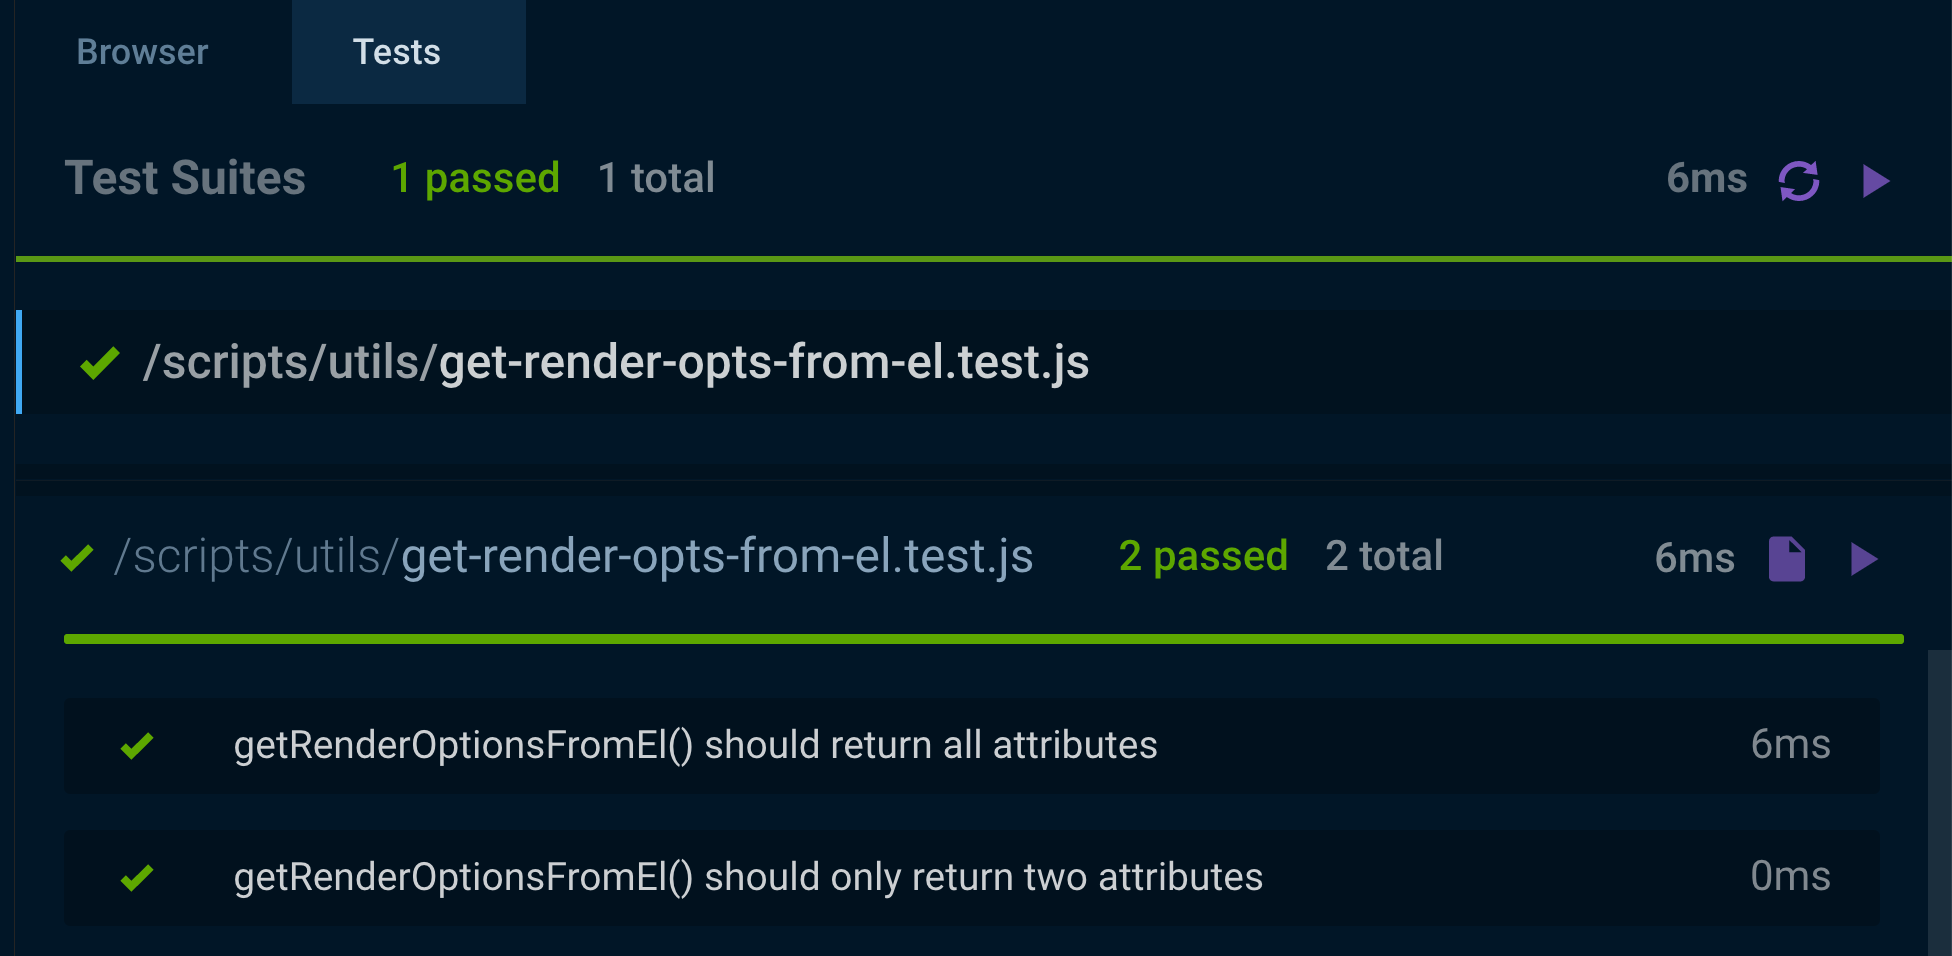 'getRenderOptionsFromEl() should only return two attributes' test passes